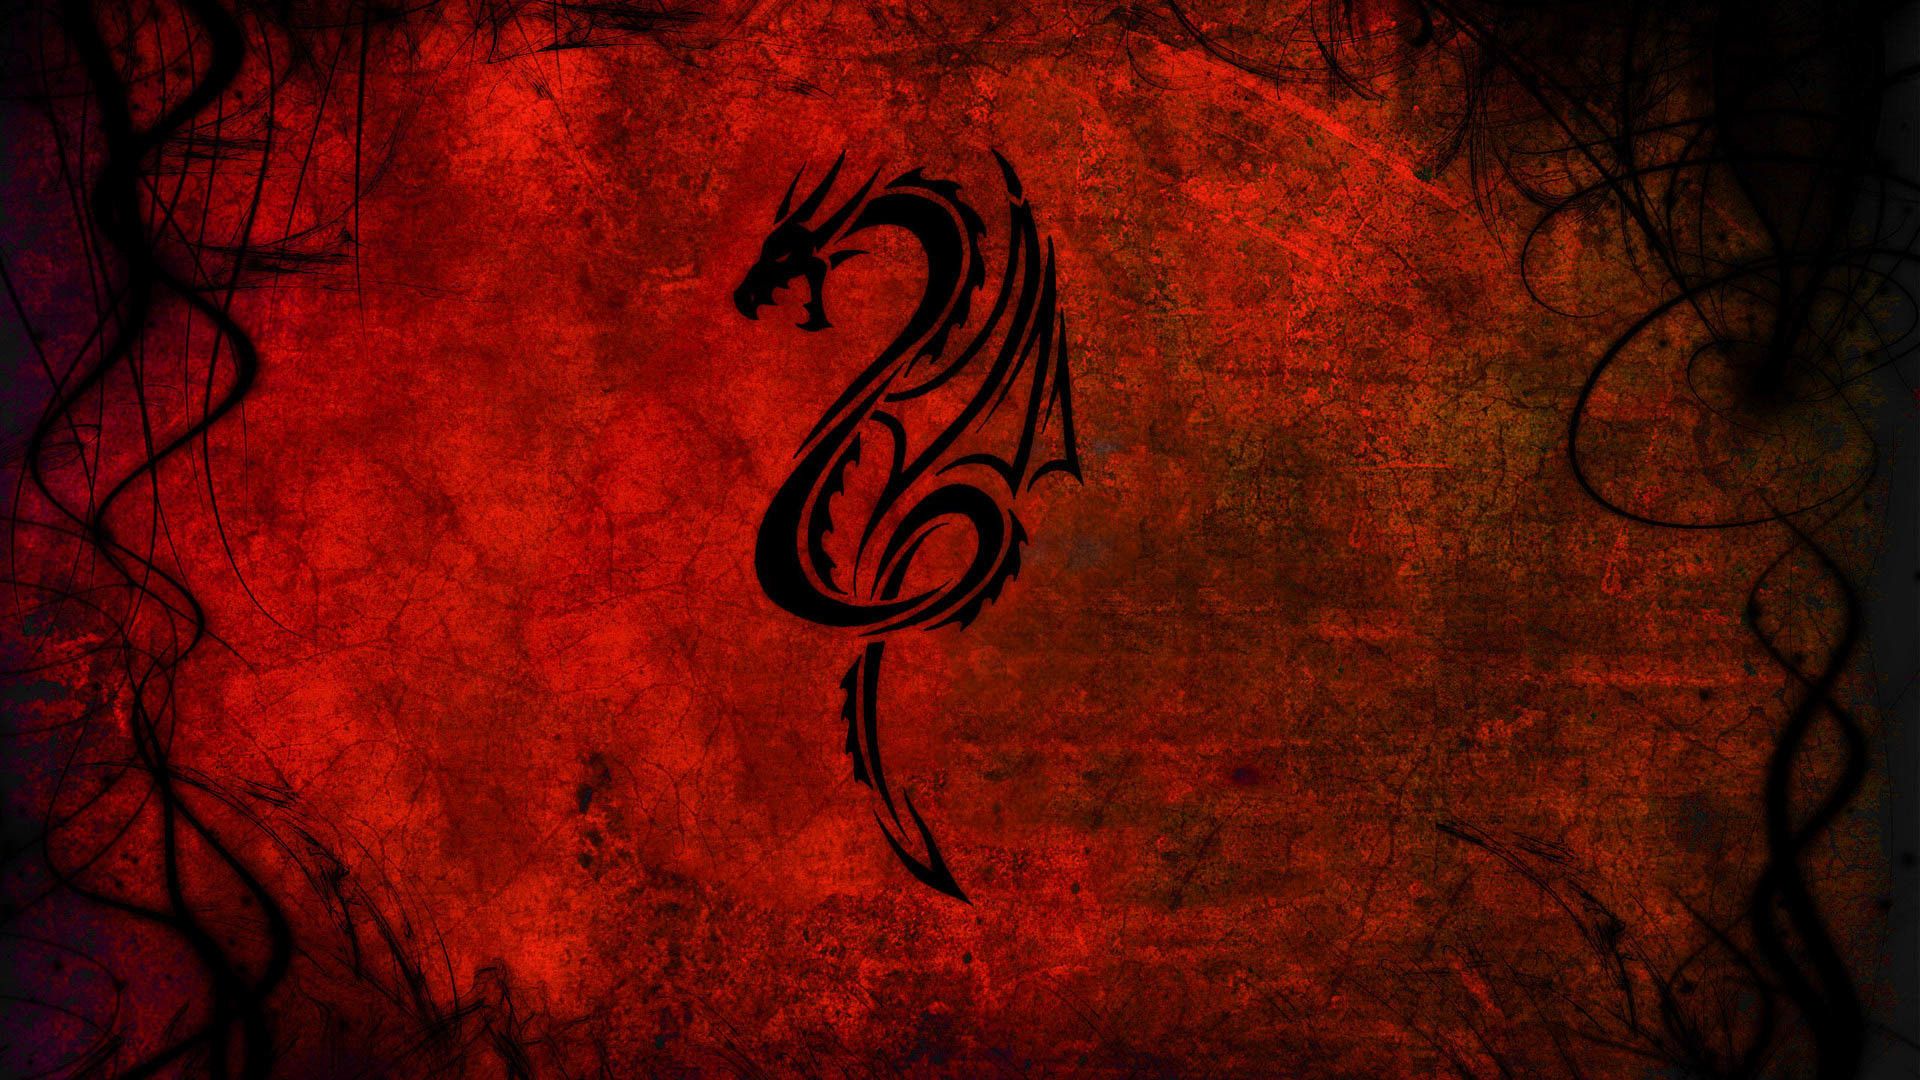 Red dragon wallpaper for desktop backgrounds and mobile devices - Grunge